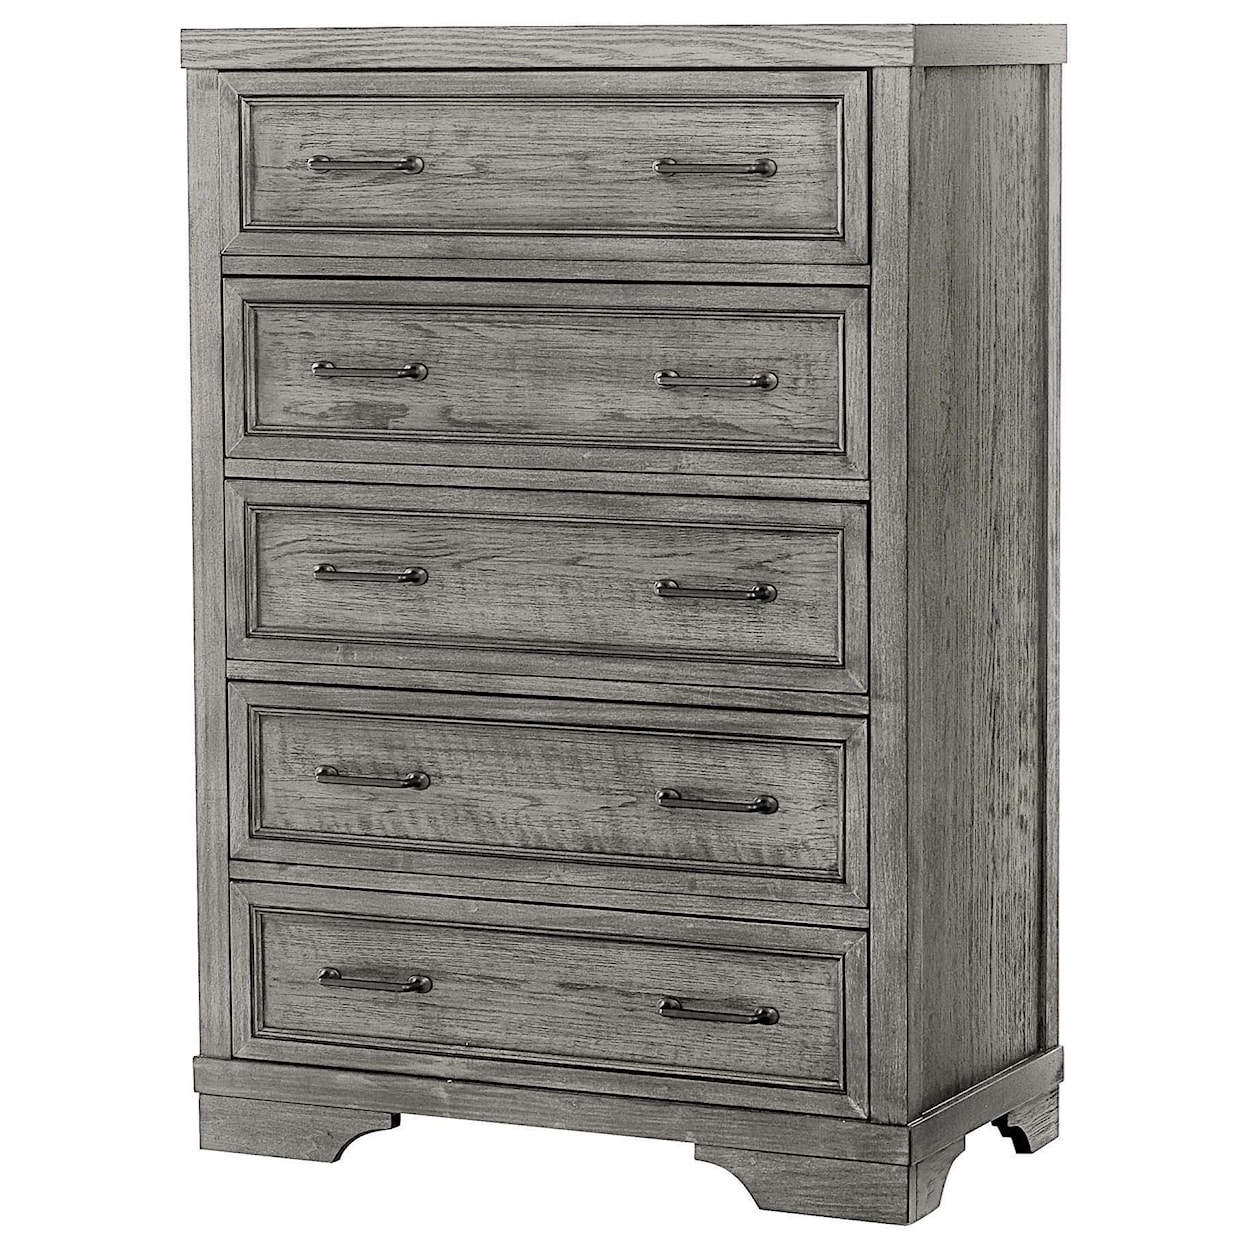 Westwood Design Foundry 5 Drawer Chest